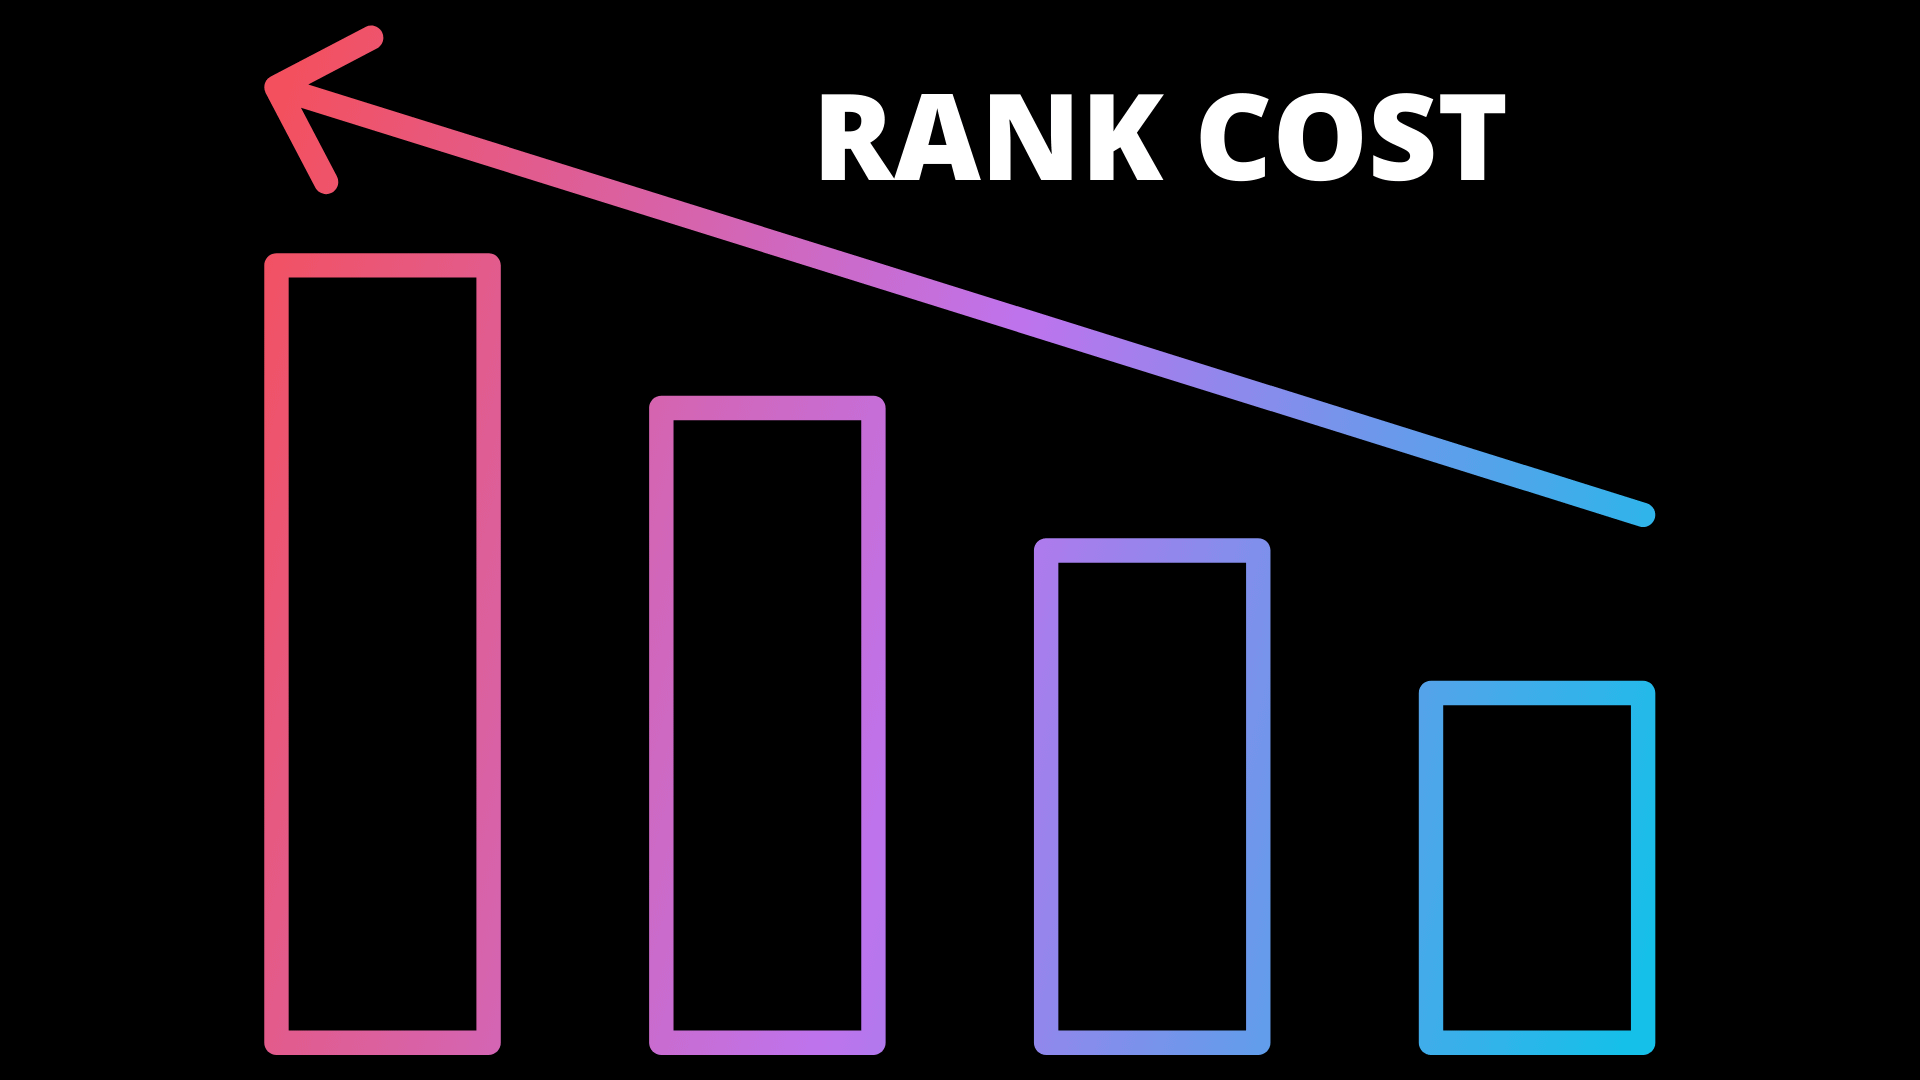 How much does it cost to rank #1 on Google?